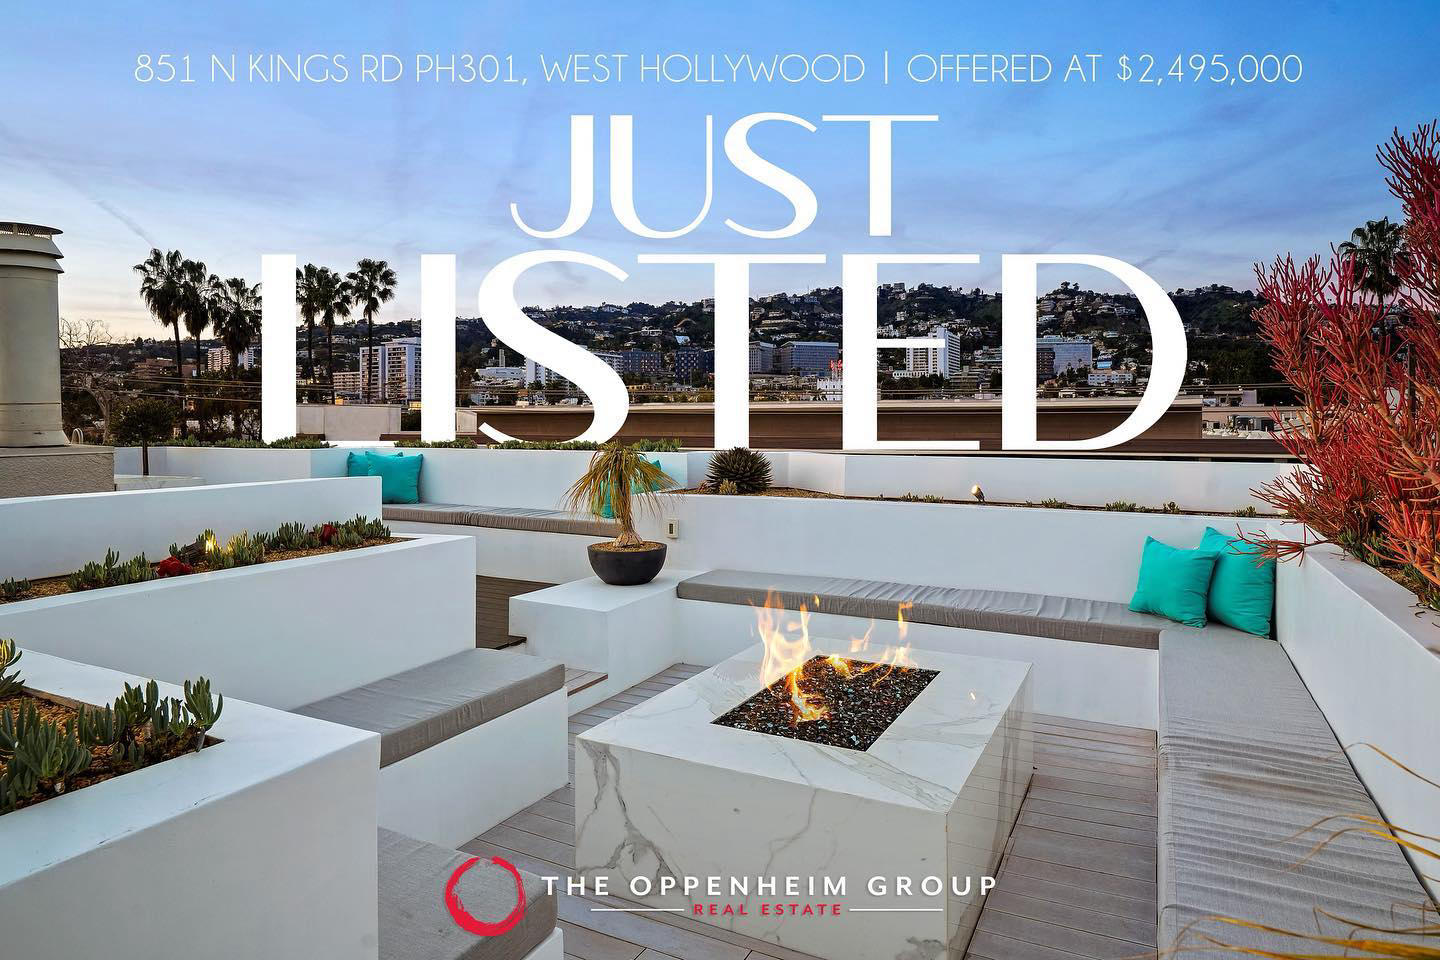 image  1 Just Listed - 851 N Kings Rd #PH301 - $2,495,0003 Beds